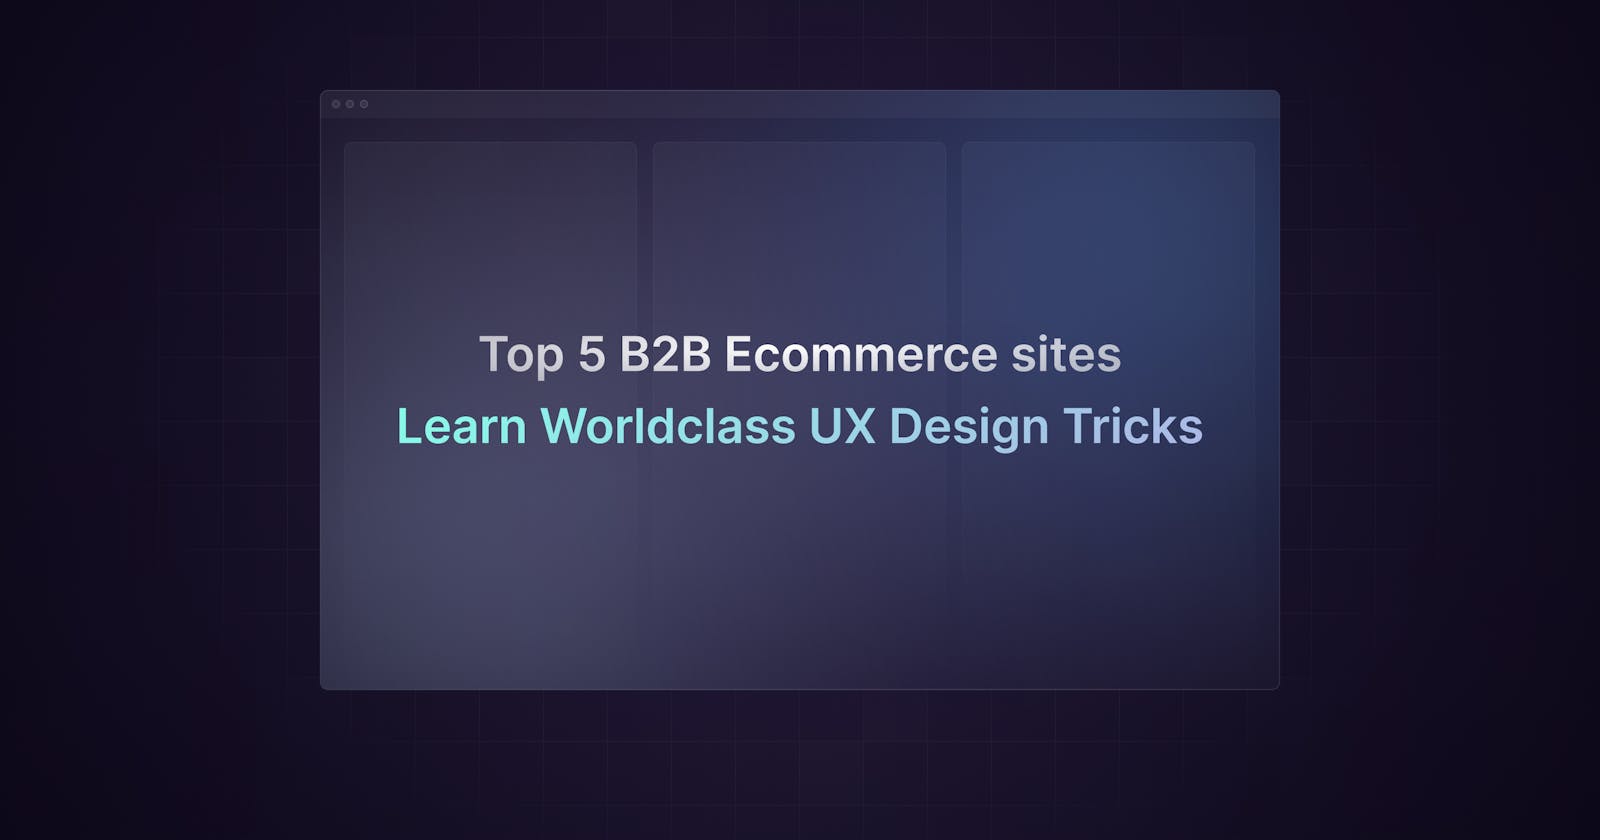 Top 5 B2B ecommerce sites to learn UX from